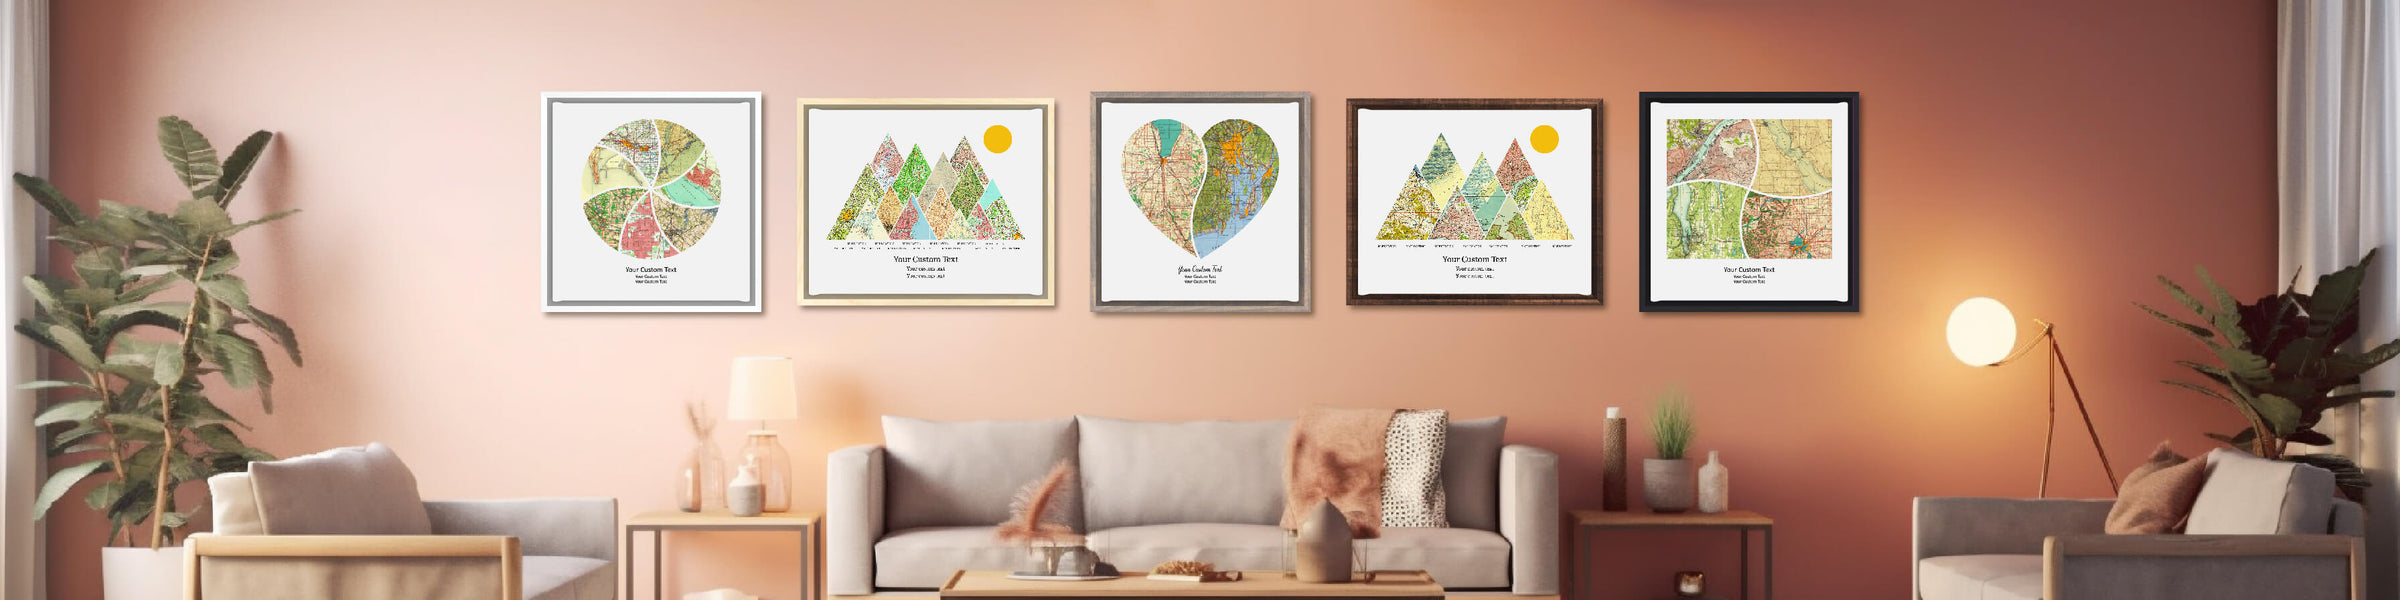 Atlas Art Collection, Designed With Meaning